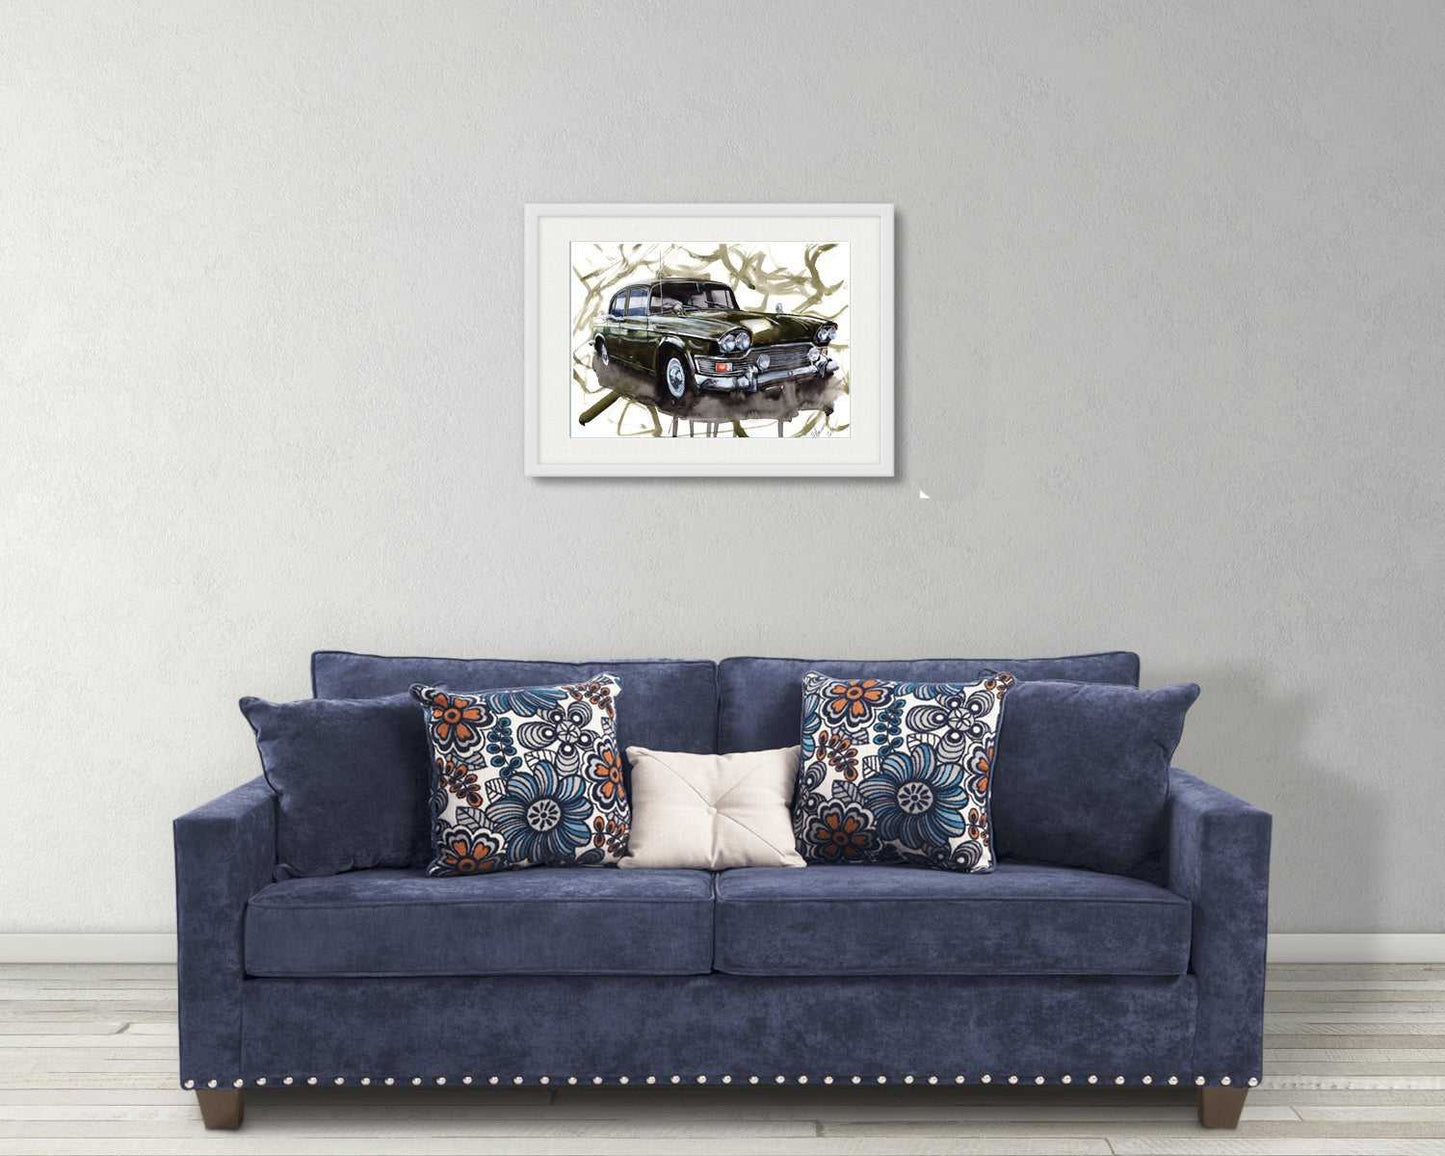 Humber Super Snipe Painting Numbered limited edition print classic British Car ArtbyMyleslaurence